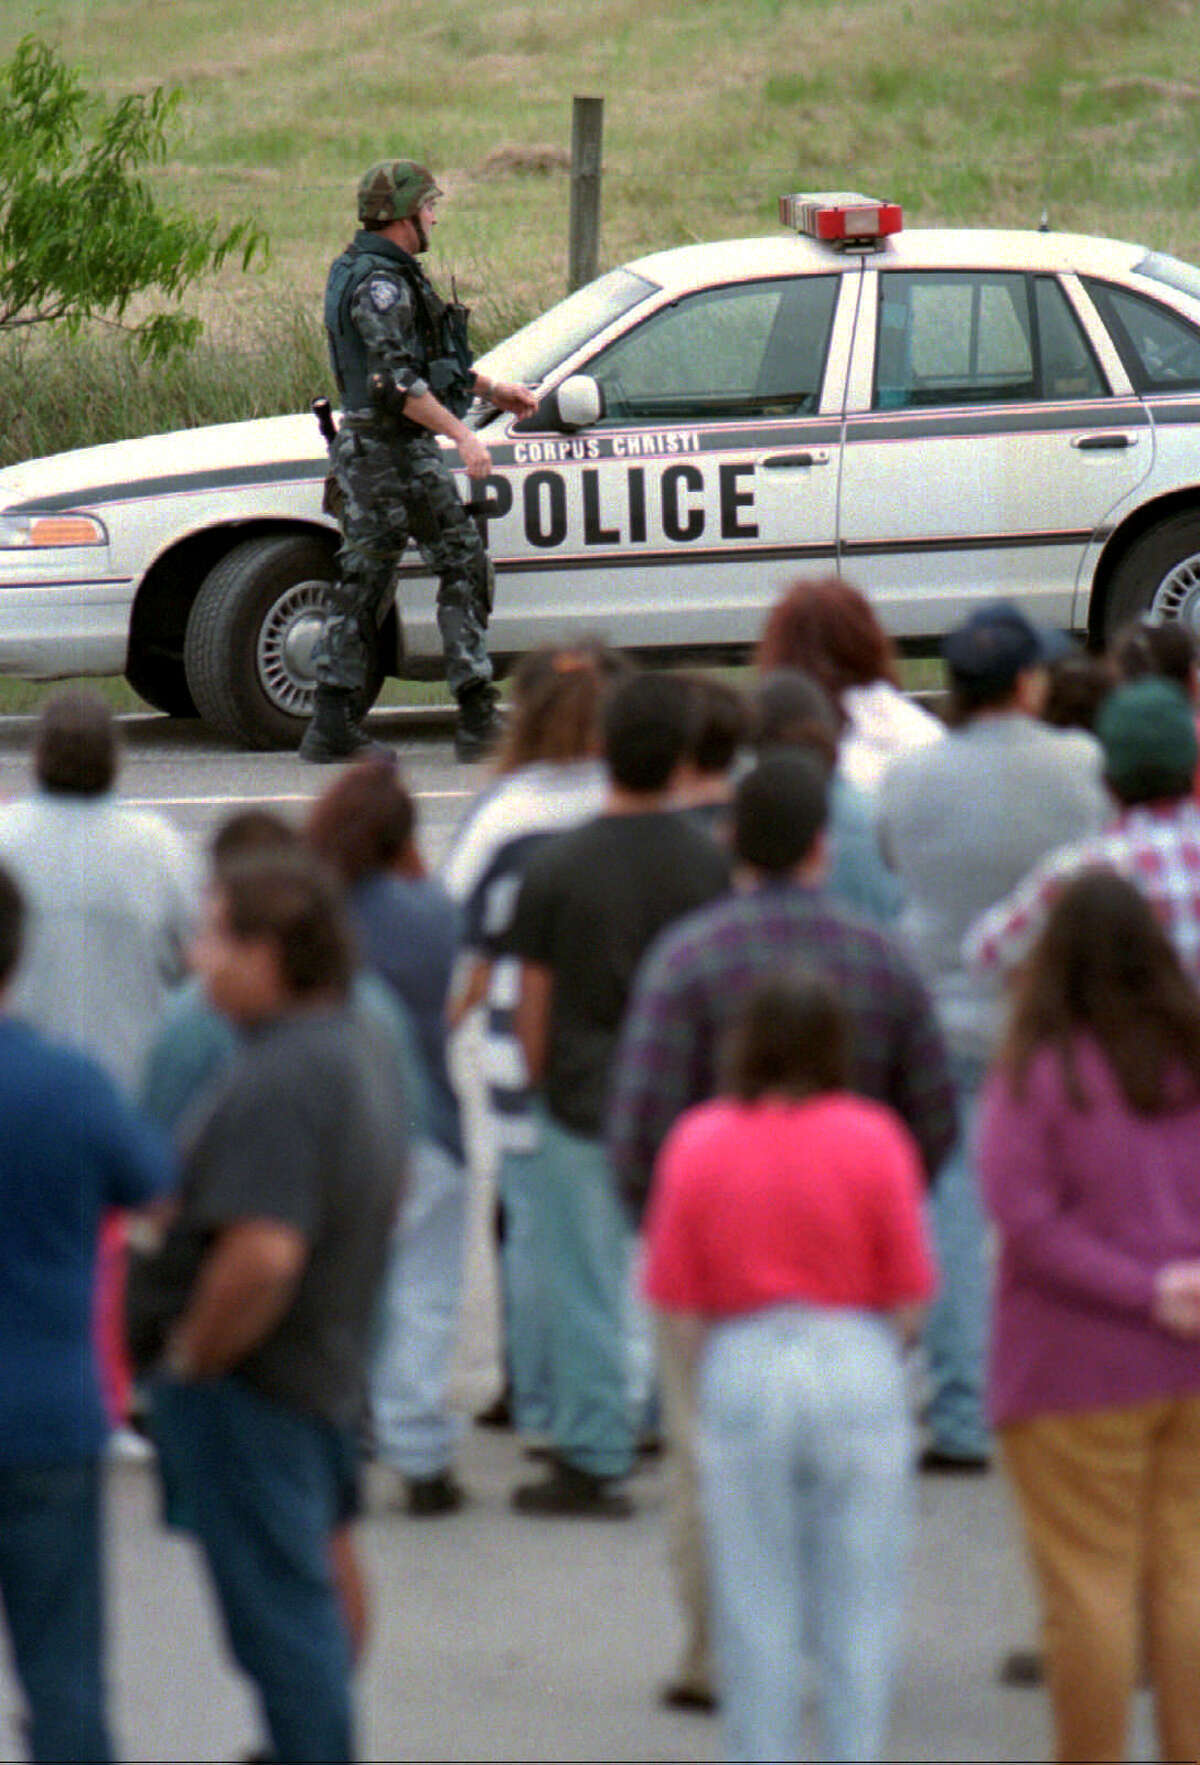 A Corpus Christi police officer leaves his patrol car enroute back to the scene of a standoff between police and Yolanda Saldivar Friday afternoon, March 31, 1995. Saldivar held police at bay for over nine hours, threatening to kill herself, before surrendering late Friday night. She is accused of killing Tejano singer Selena in a motel room before barricading herself in a pickup truck in the motel's parking lot.